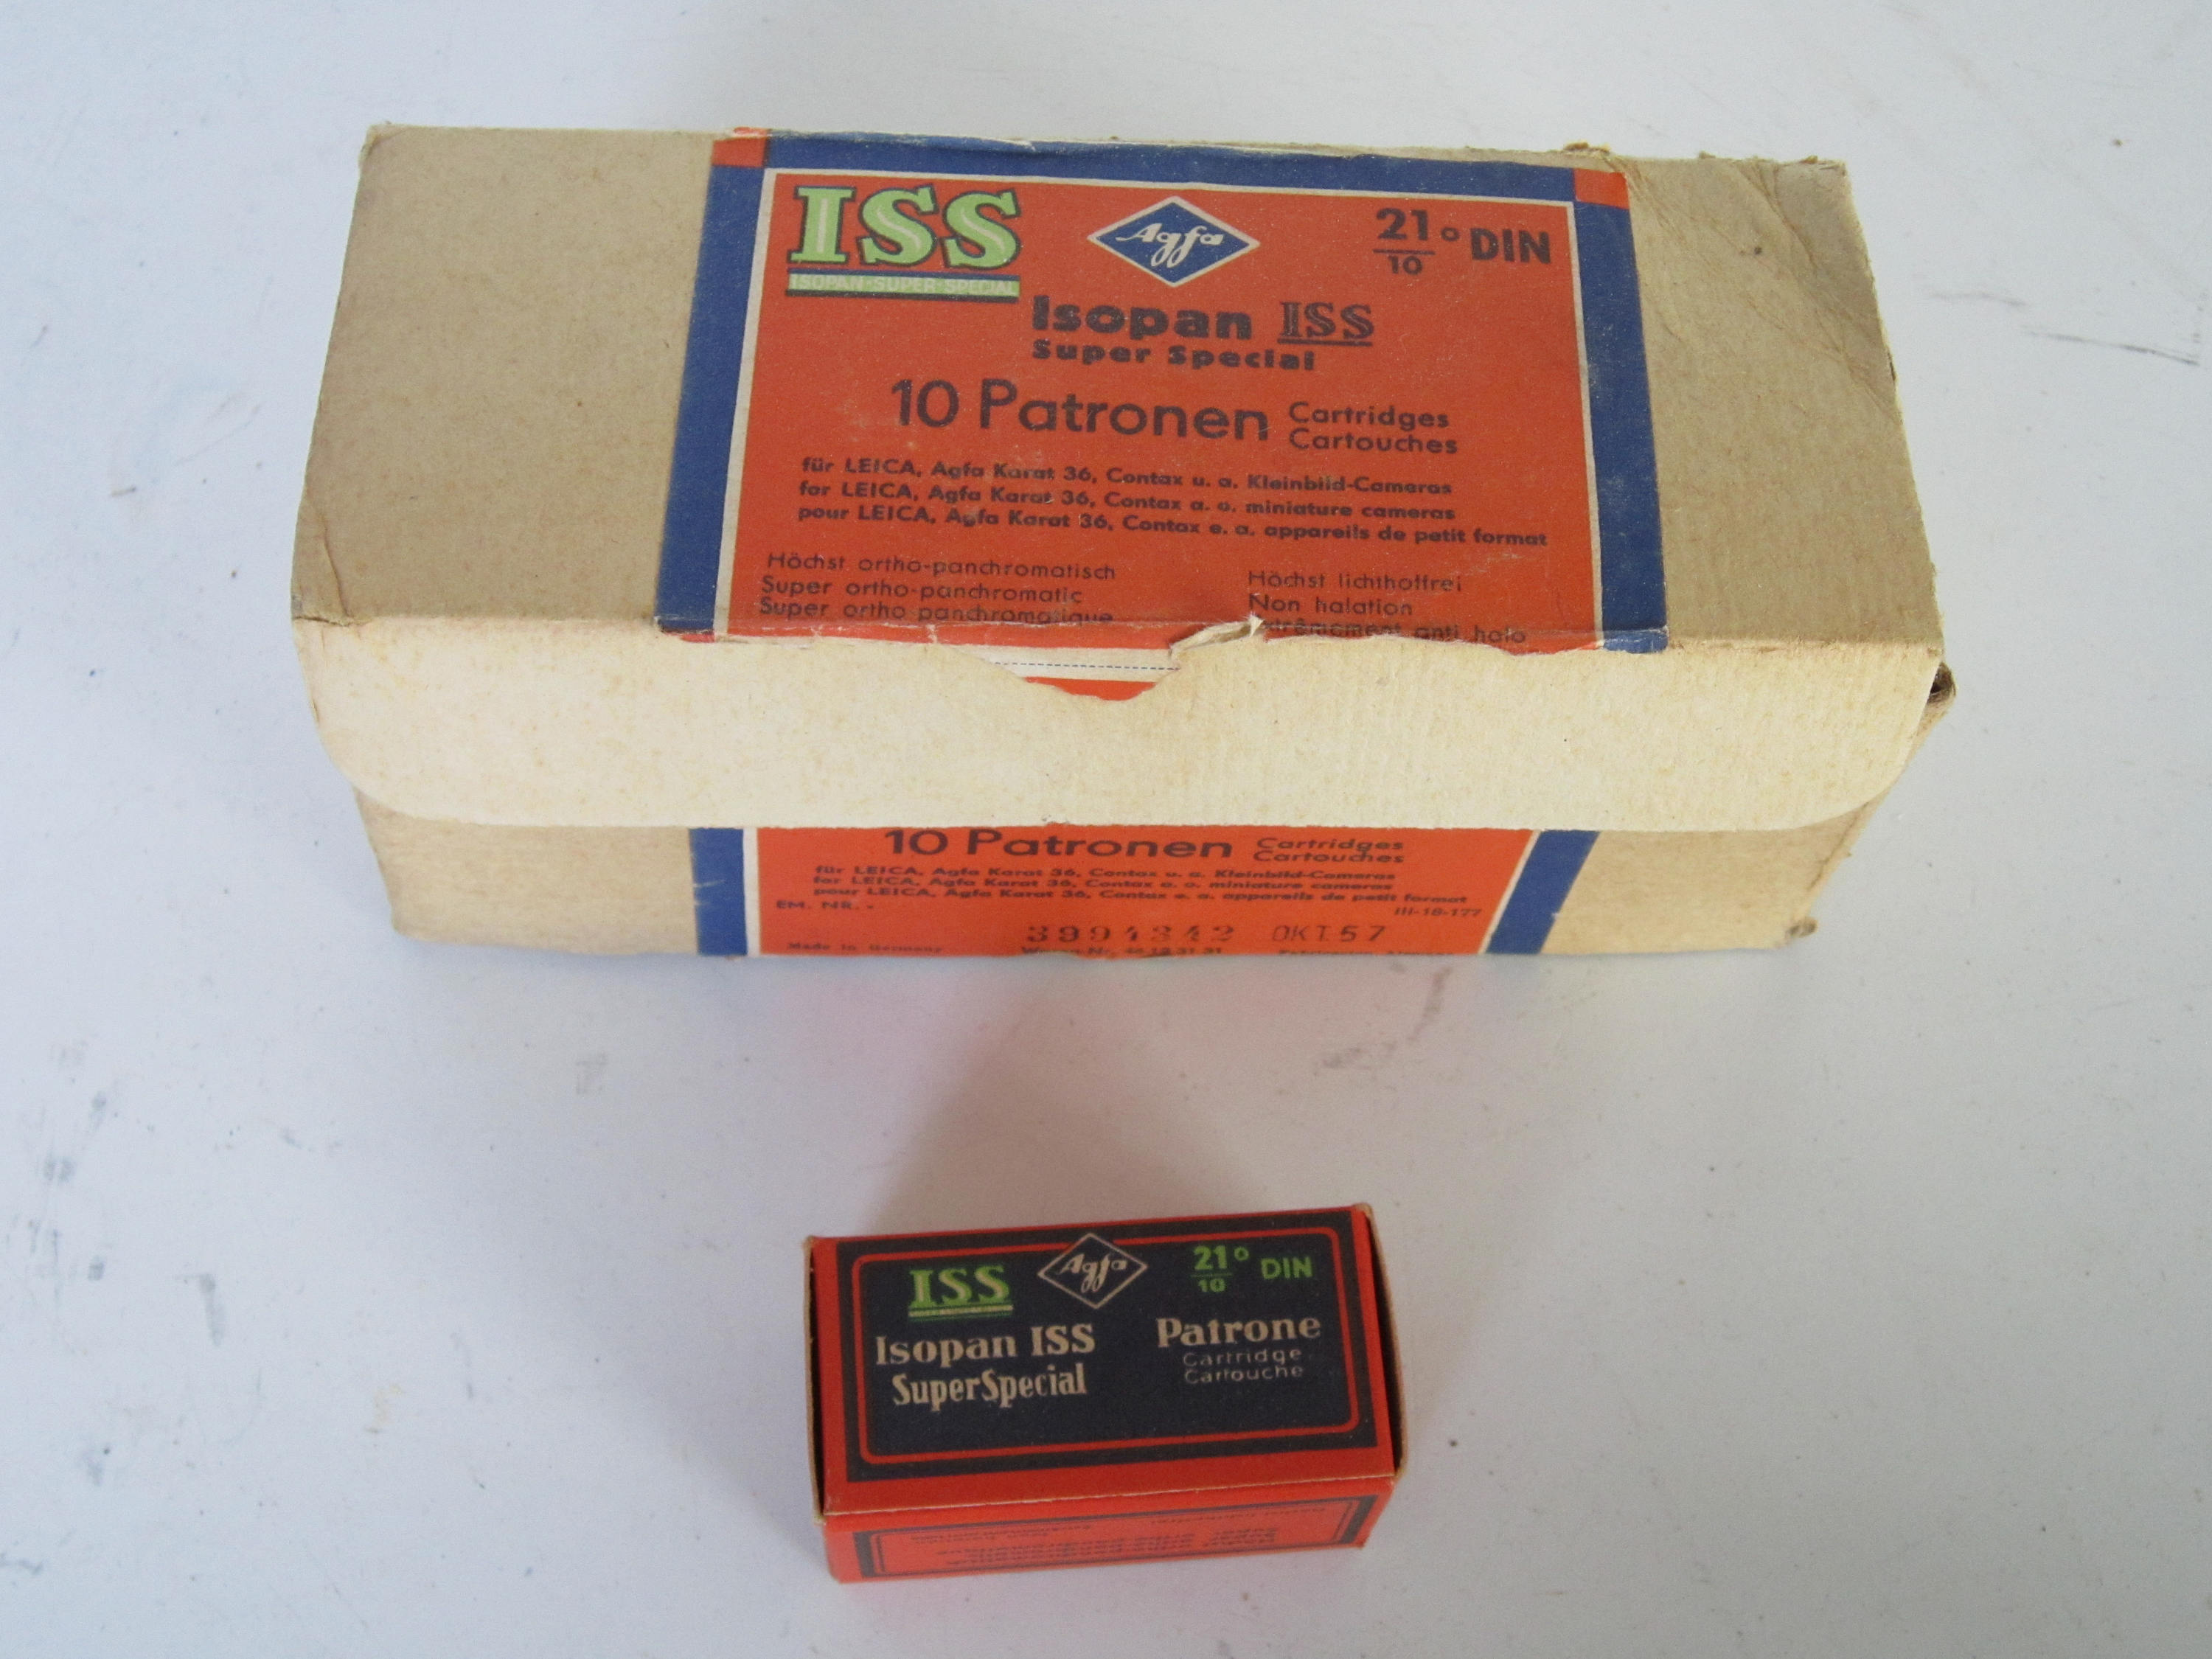 1 Roll of AGFA Isopan ISS 35mm film from 1957 black and white from ...